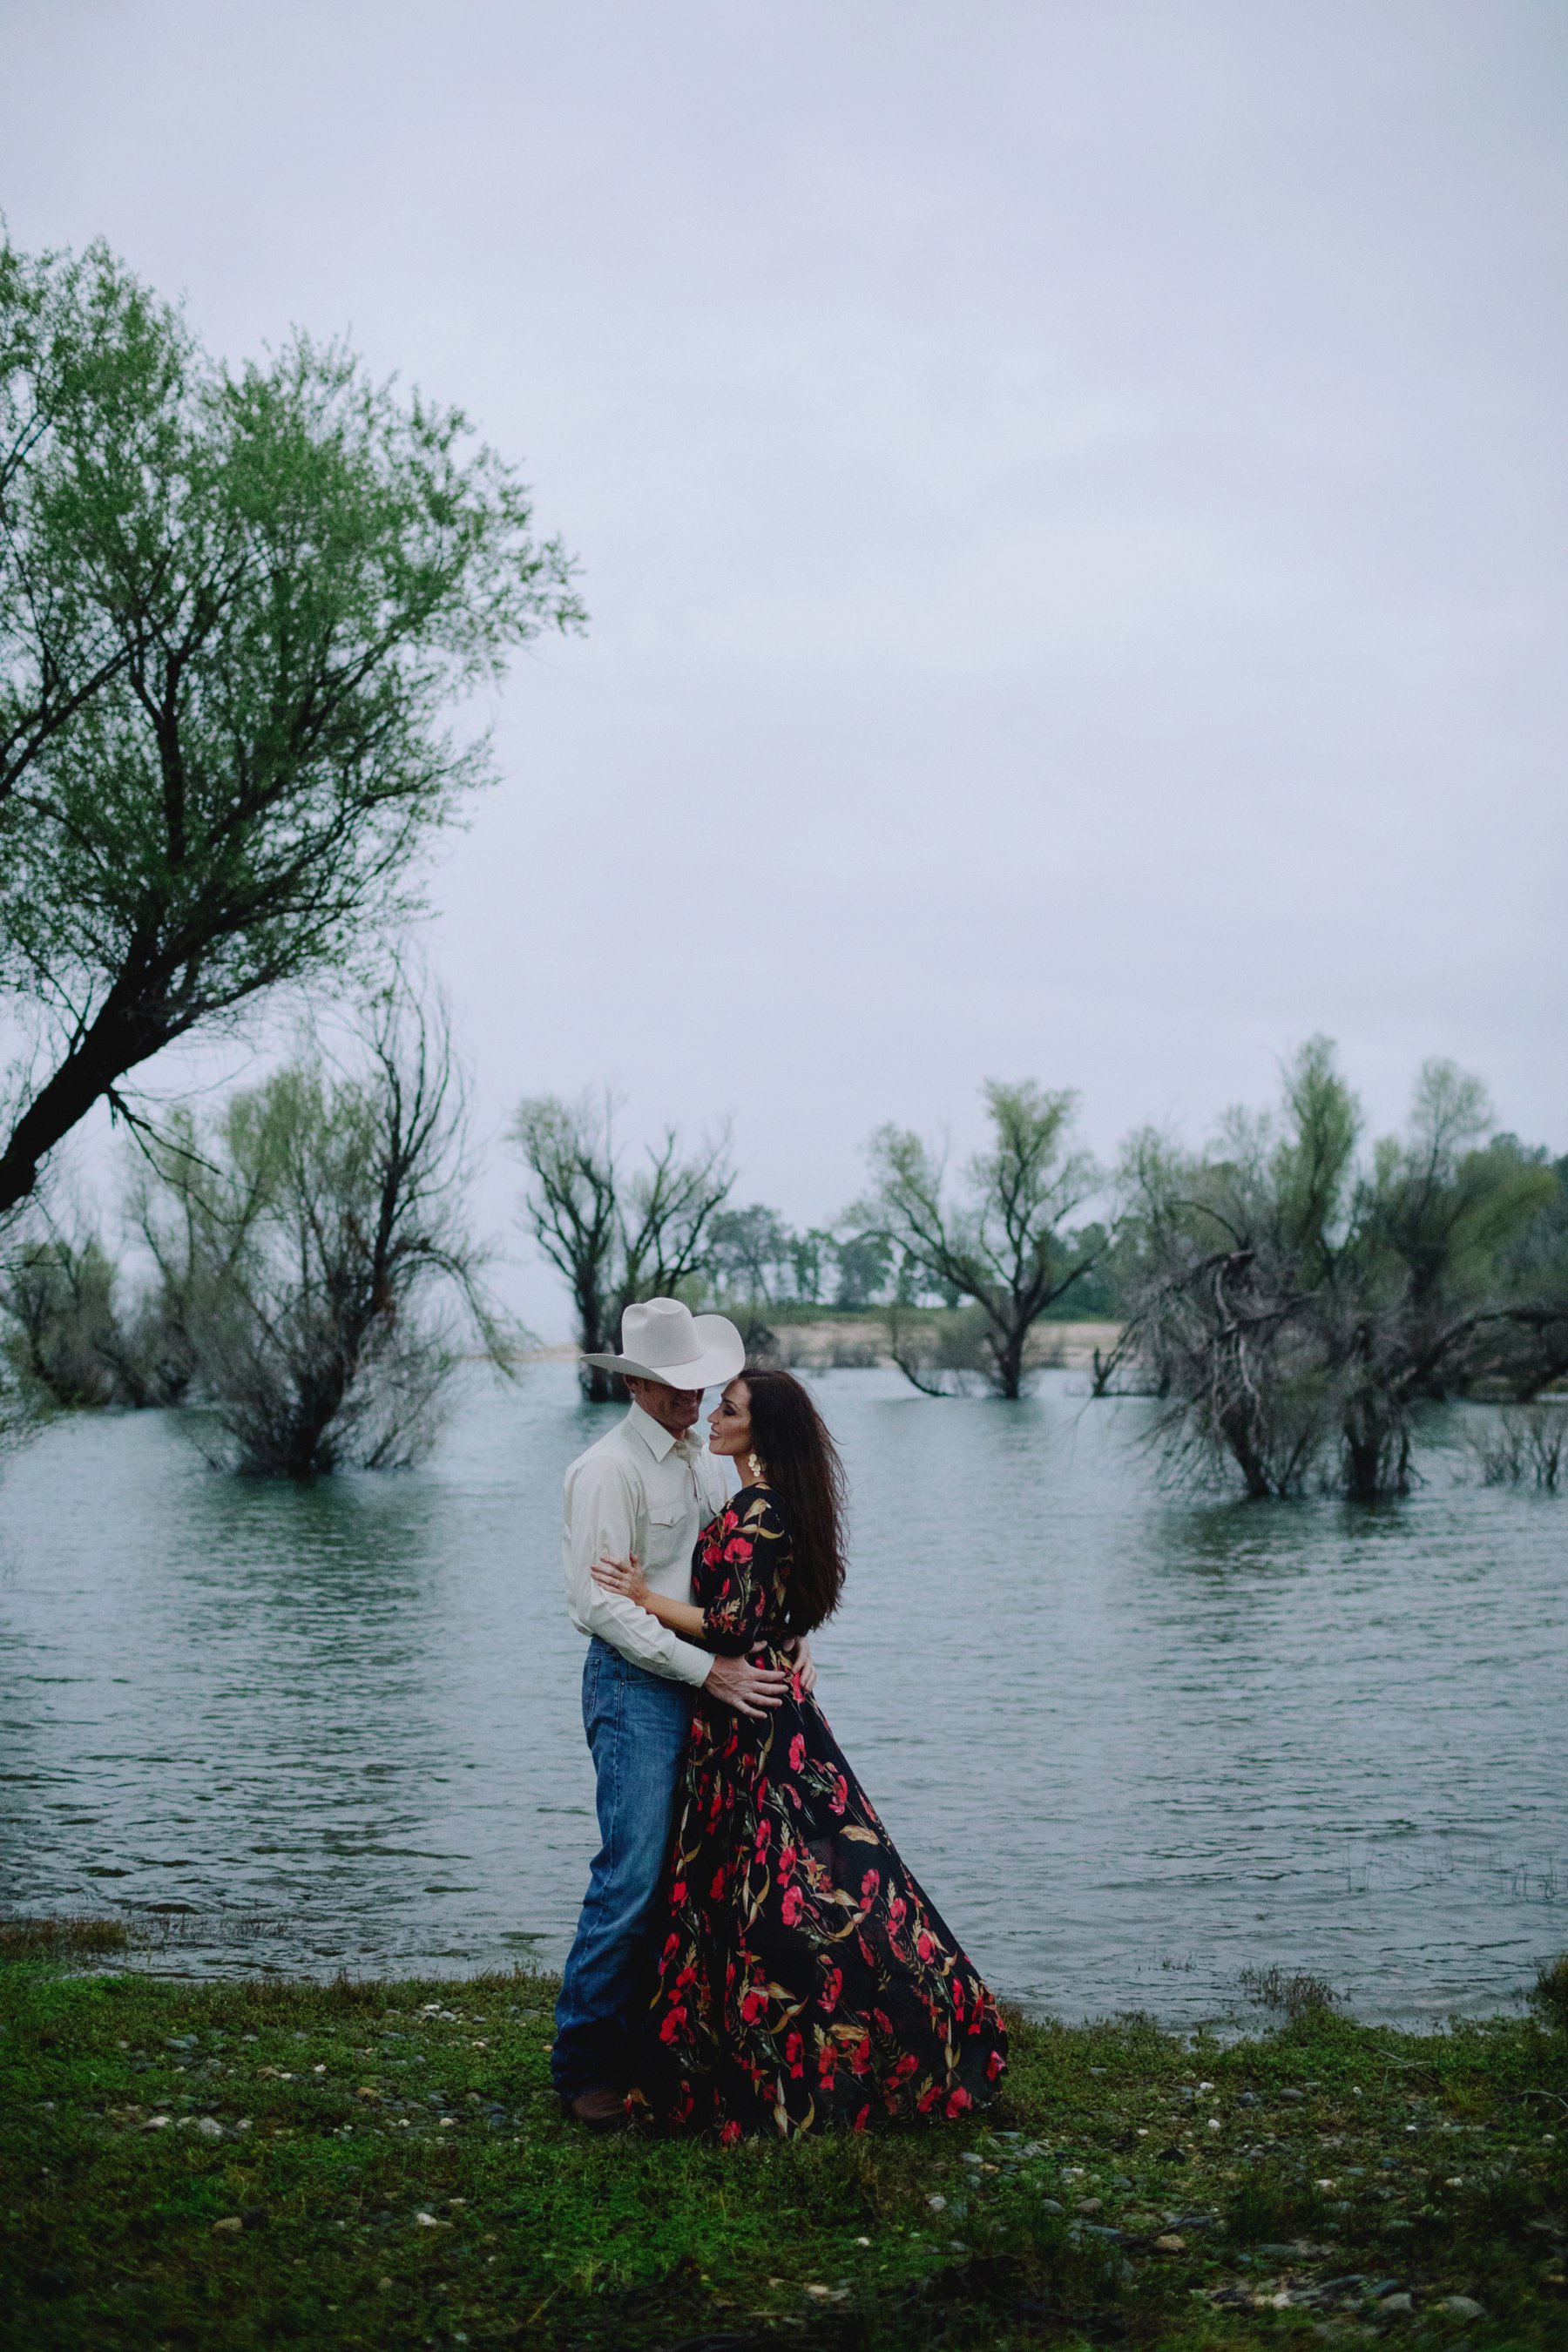 cowboy hat engagement session by the lake and woods in Northern California - Diana Elizabeth photography - www.dianaelizabeth.com